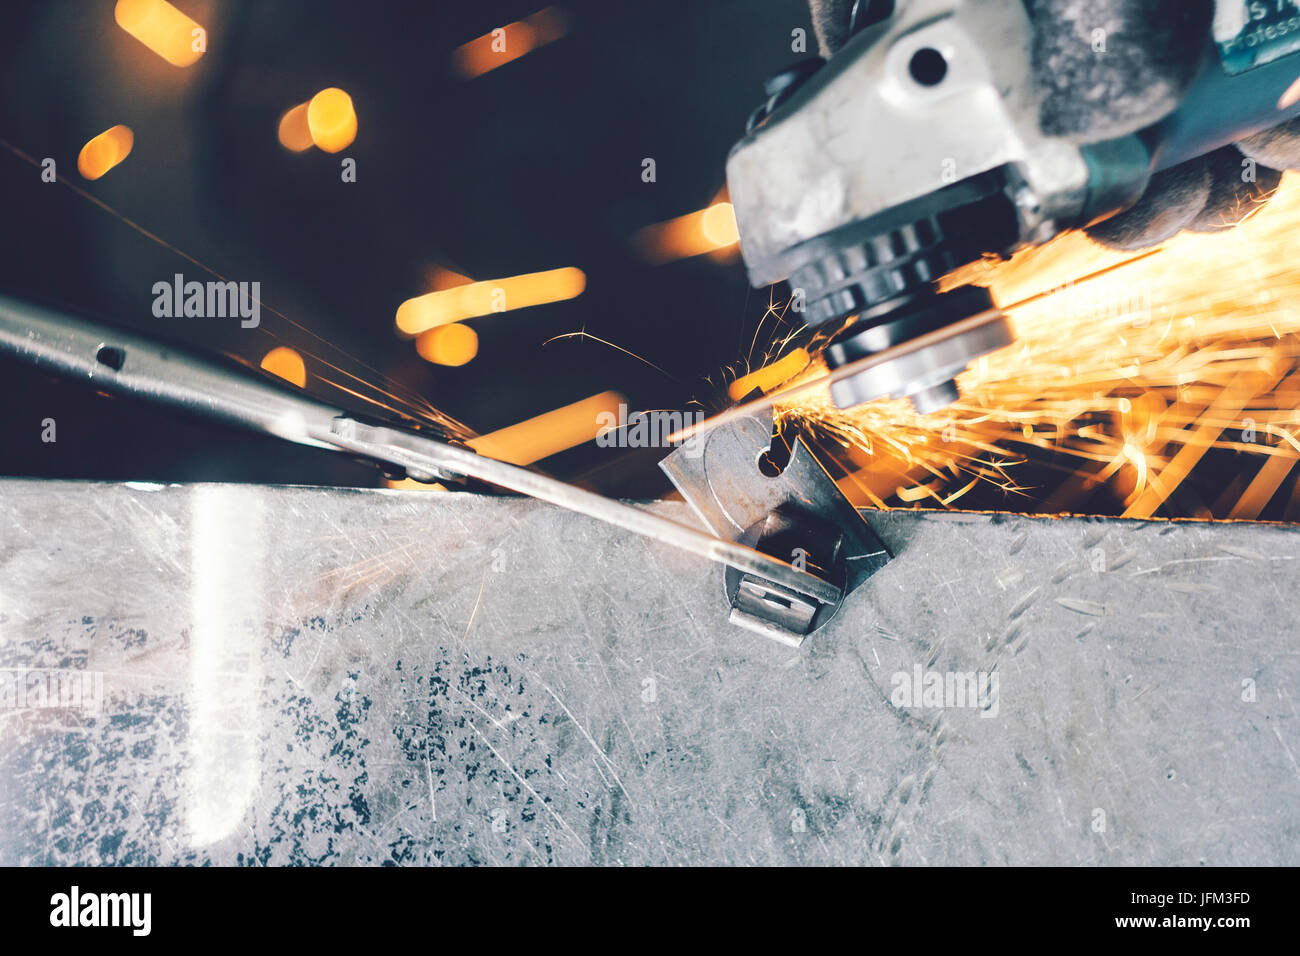 Cutting of curlicue hook using hand angle grinder and spreading sparks all around Stock Photo